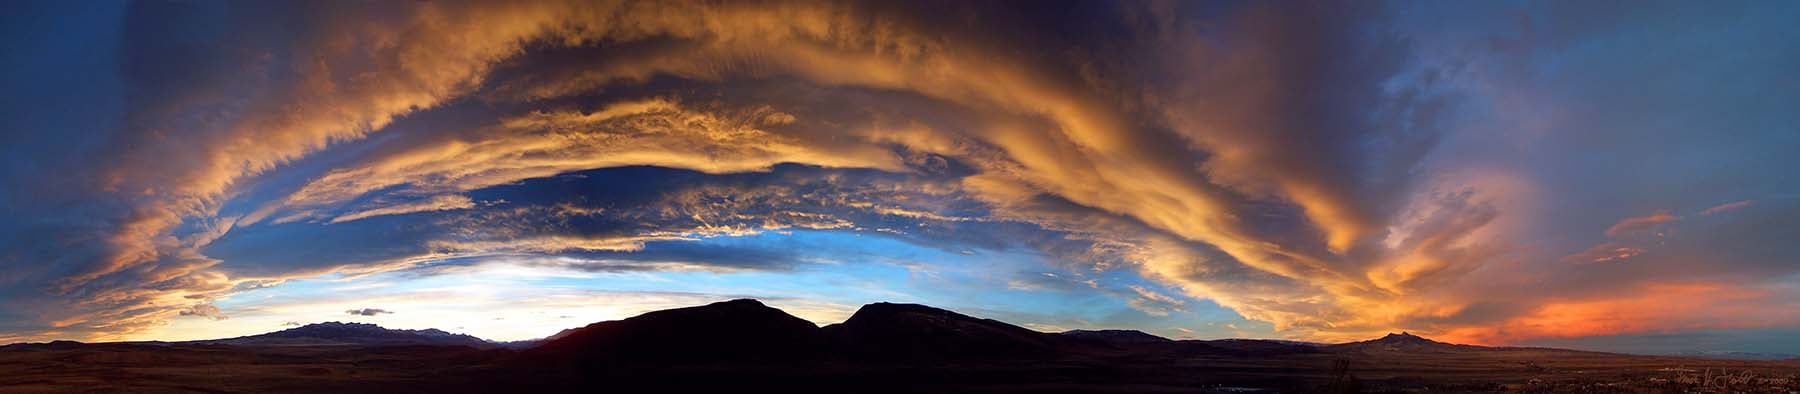 All-sky sunset. Photo by Mack Frost.